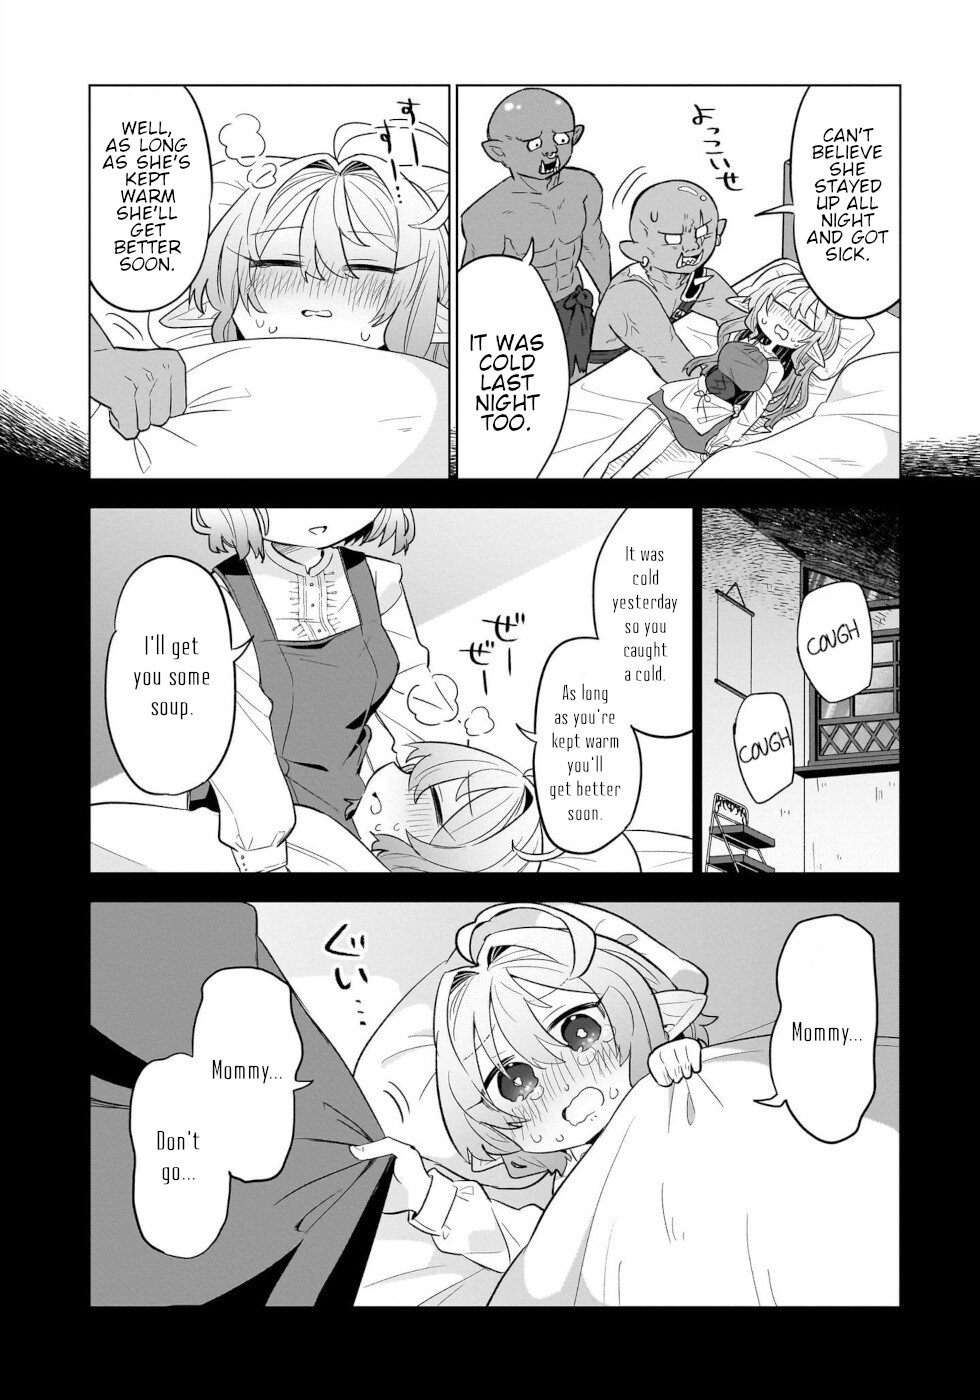 Sweets, Elf, And A High School Girl - chapter 7.5 - #4